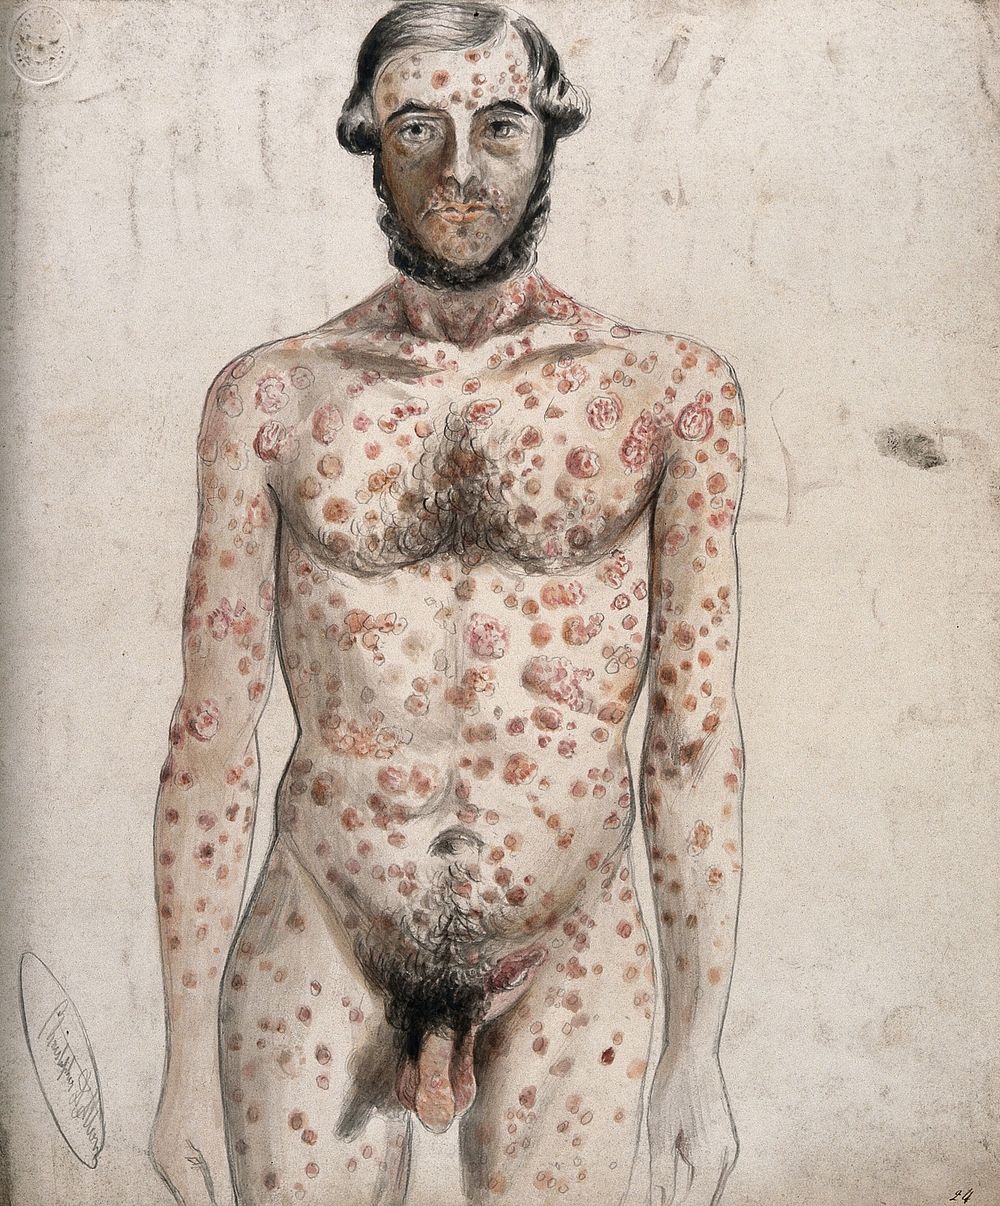 Sores and abcesses  covering the face and body of a man. Watercolour by C. D'Alton, ca. 1853.